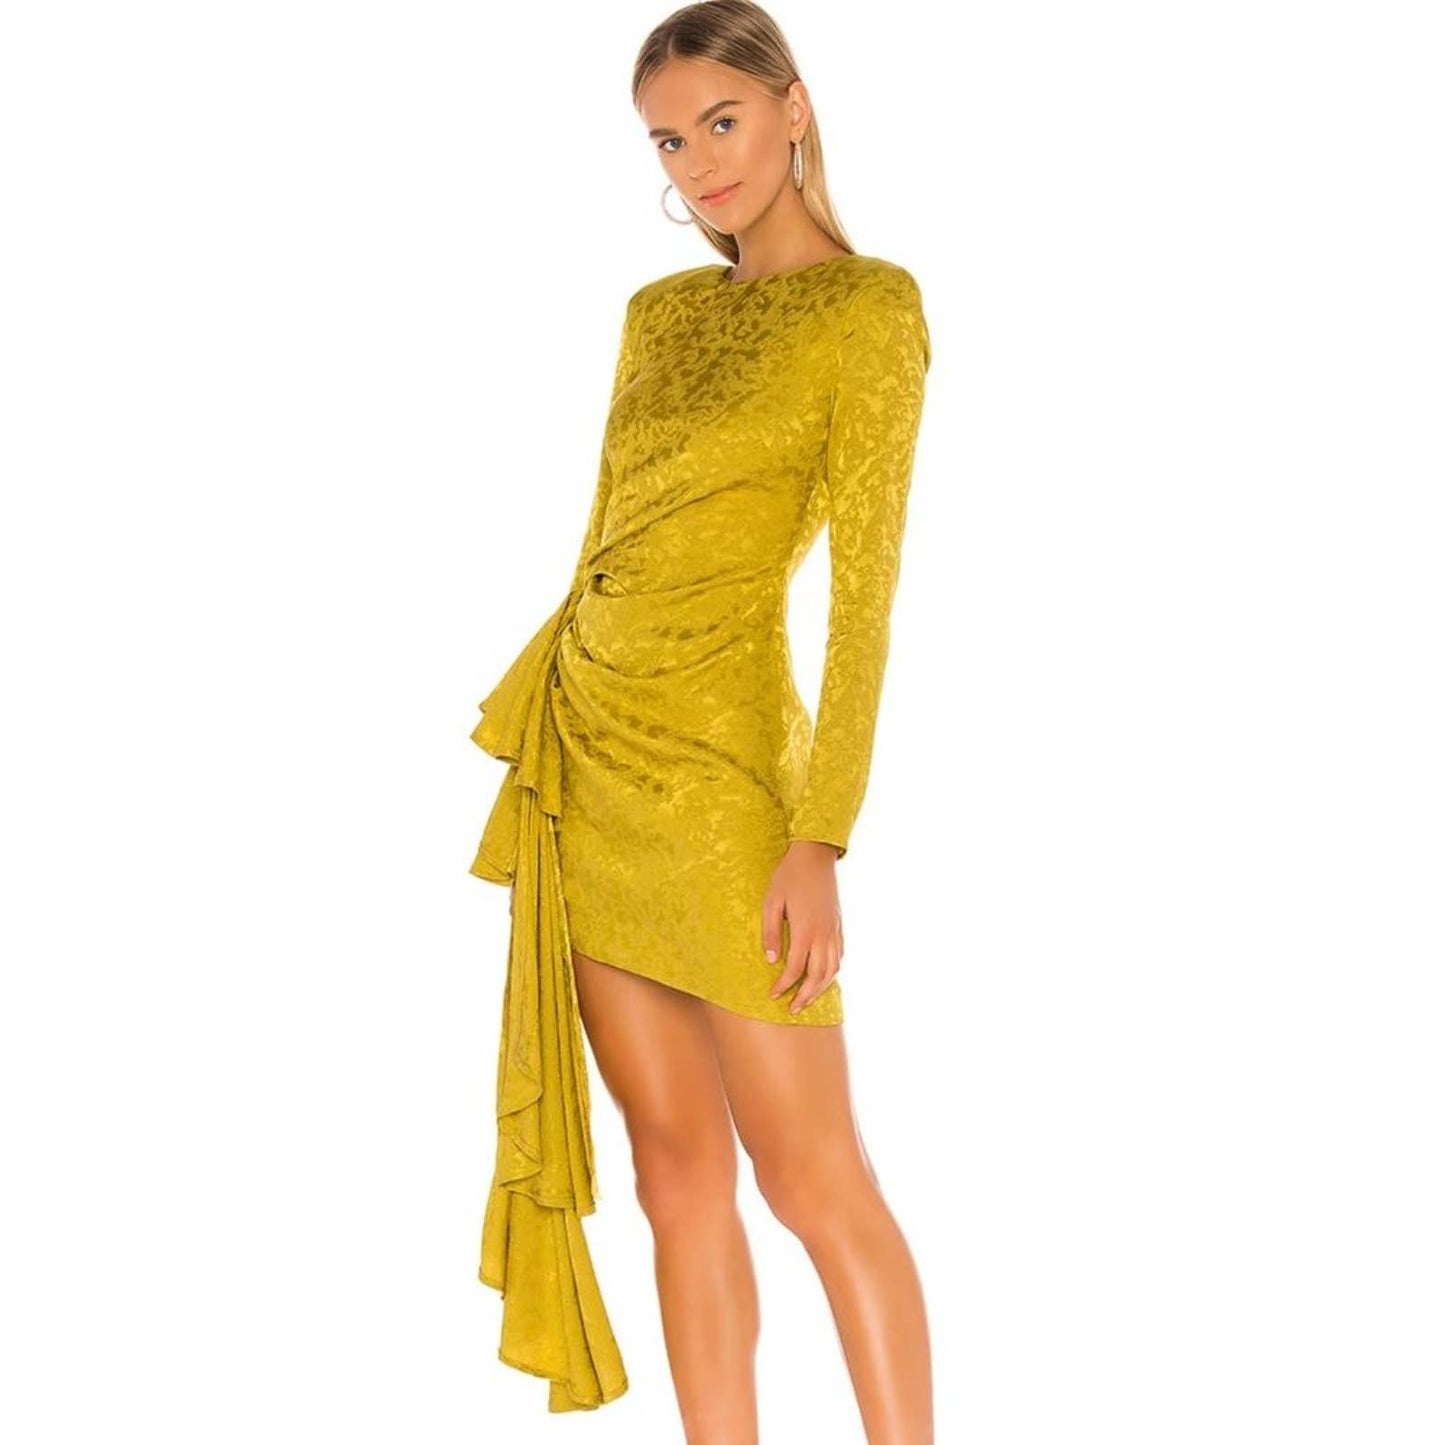 Lovers and Friends Matilda Mini Dress in Citron Green NWT Size Small